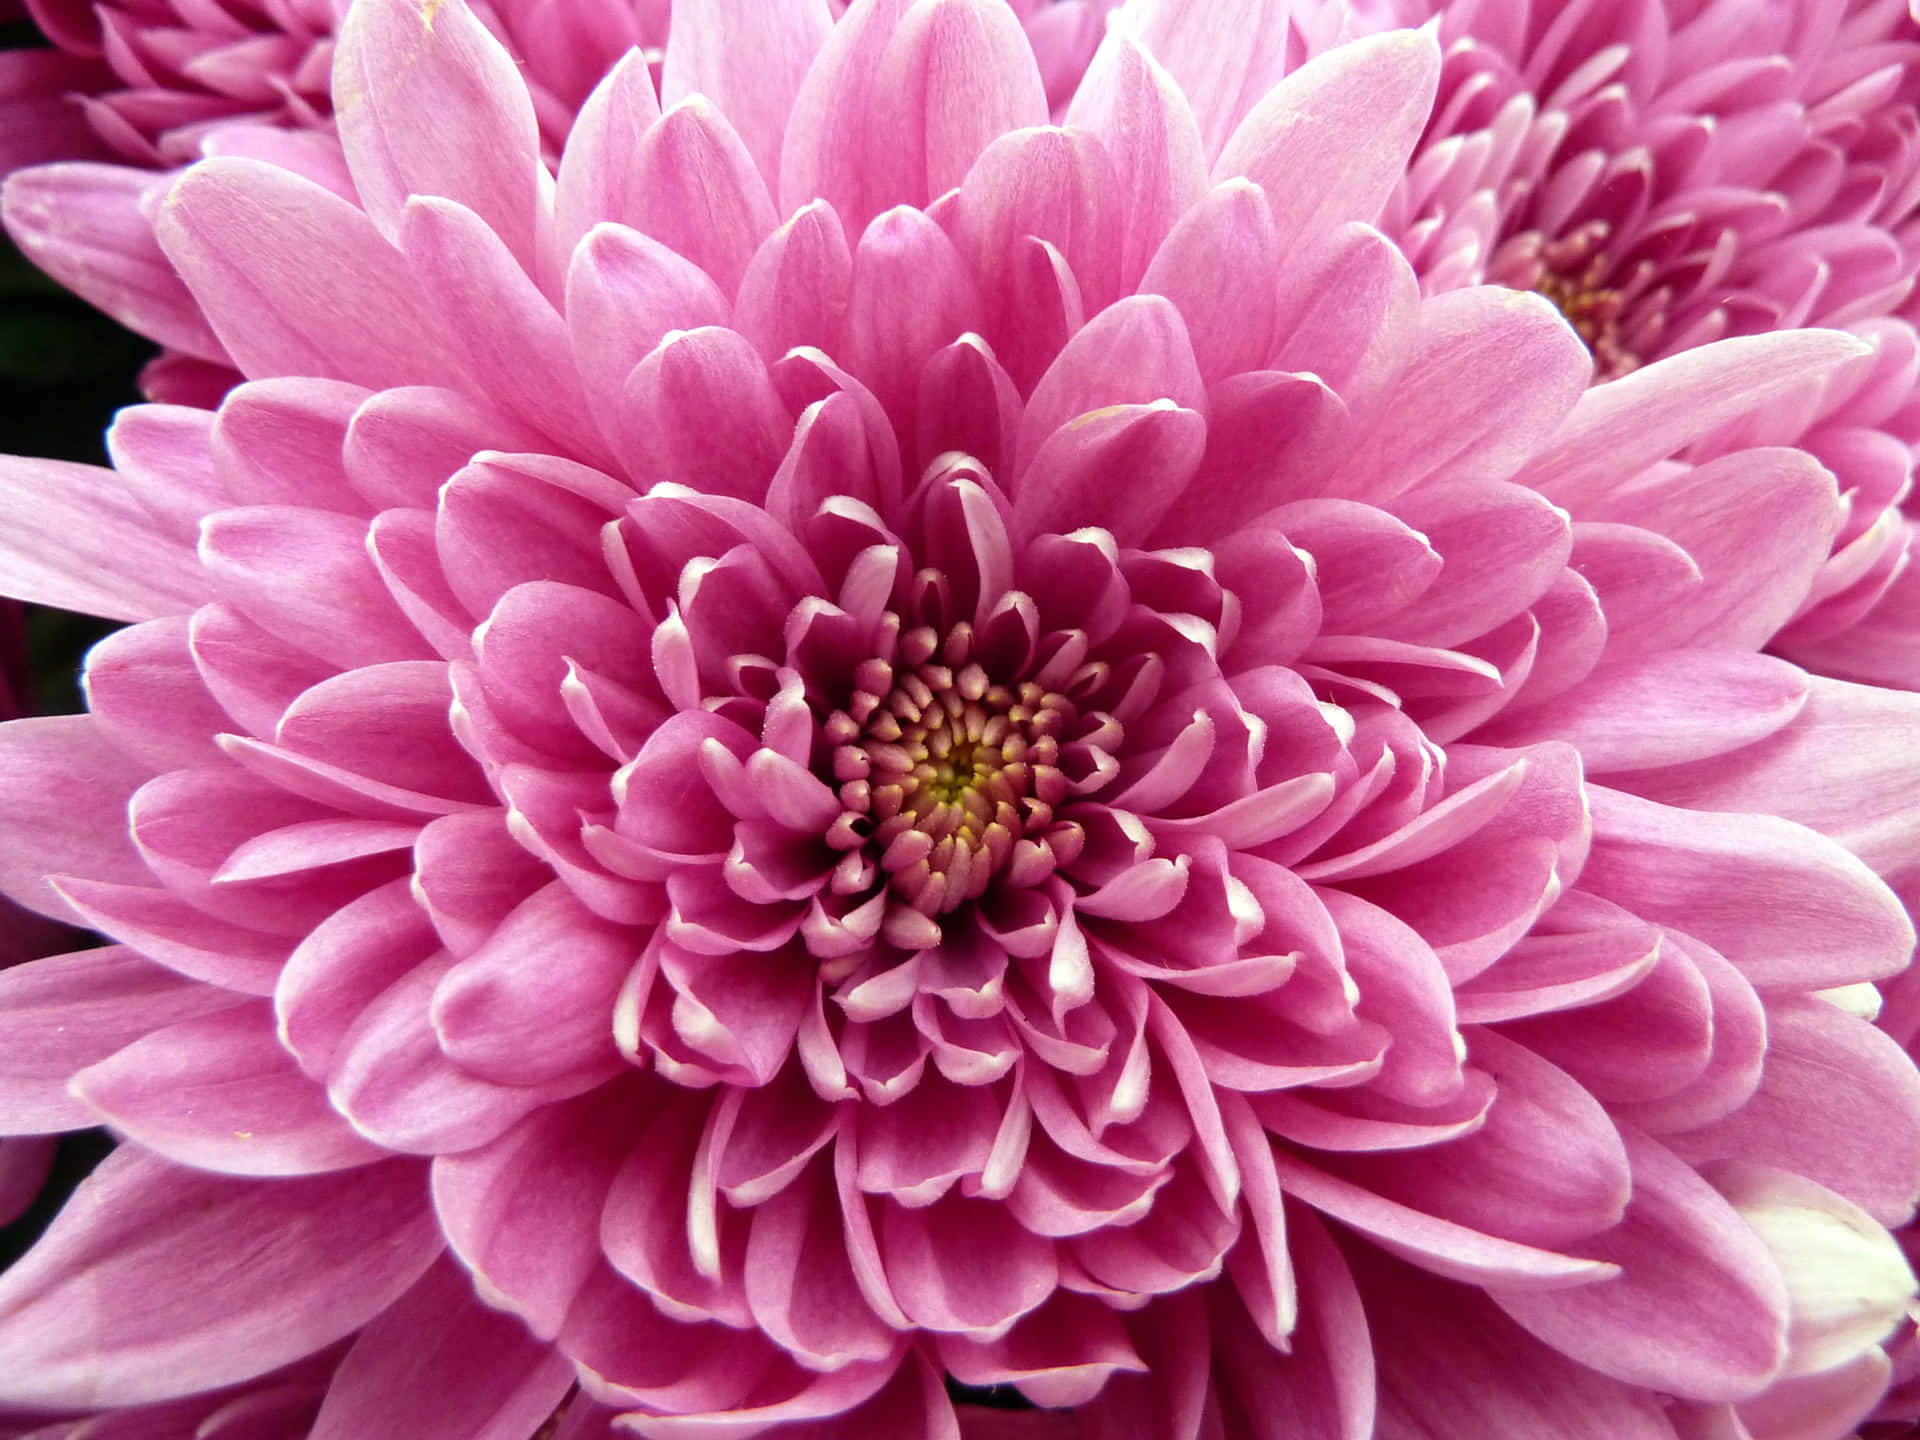 A beautiful pink chrysanthemum flower blossoming in the sunshine.